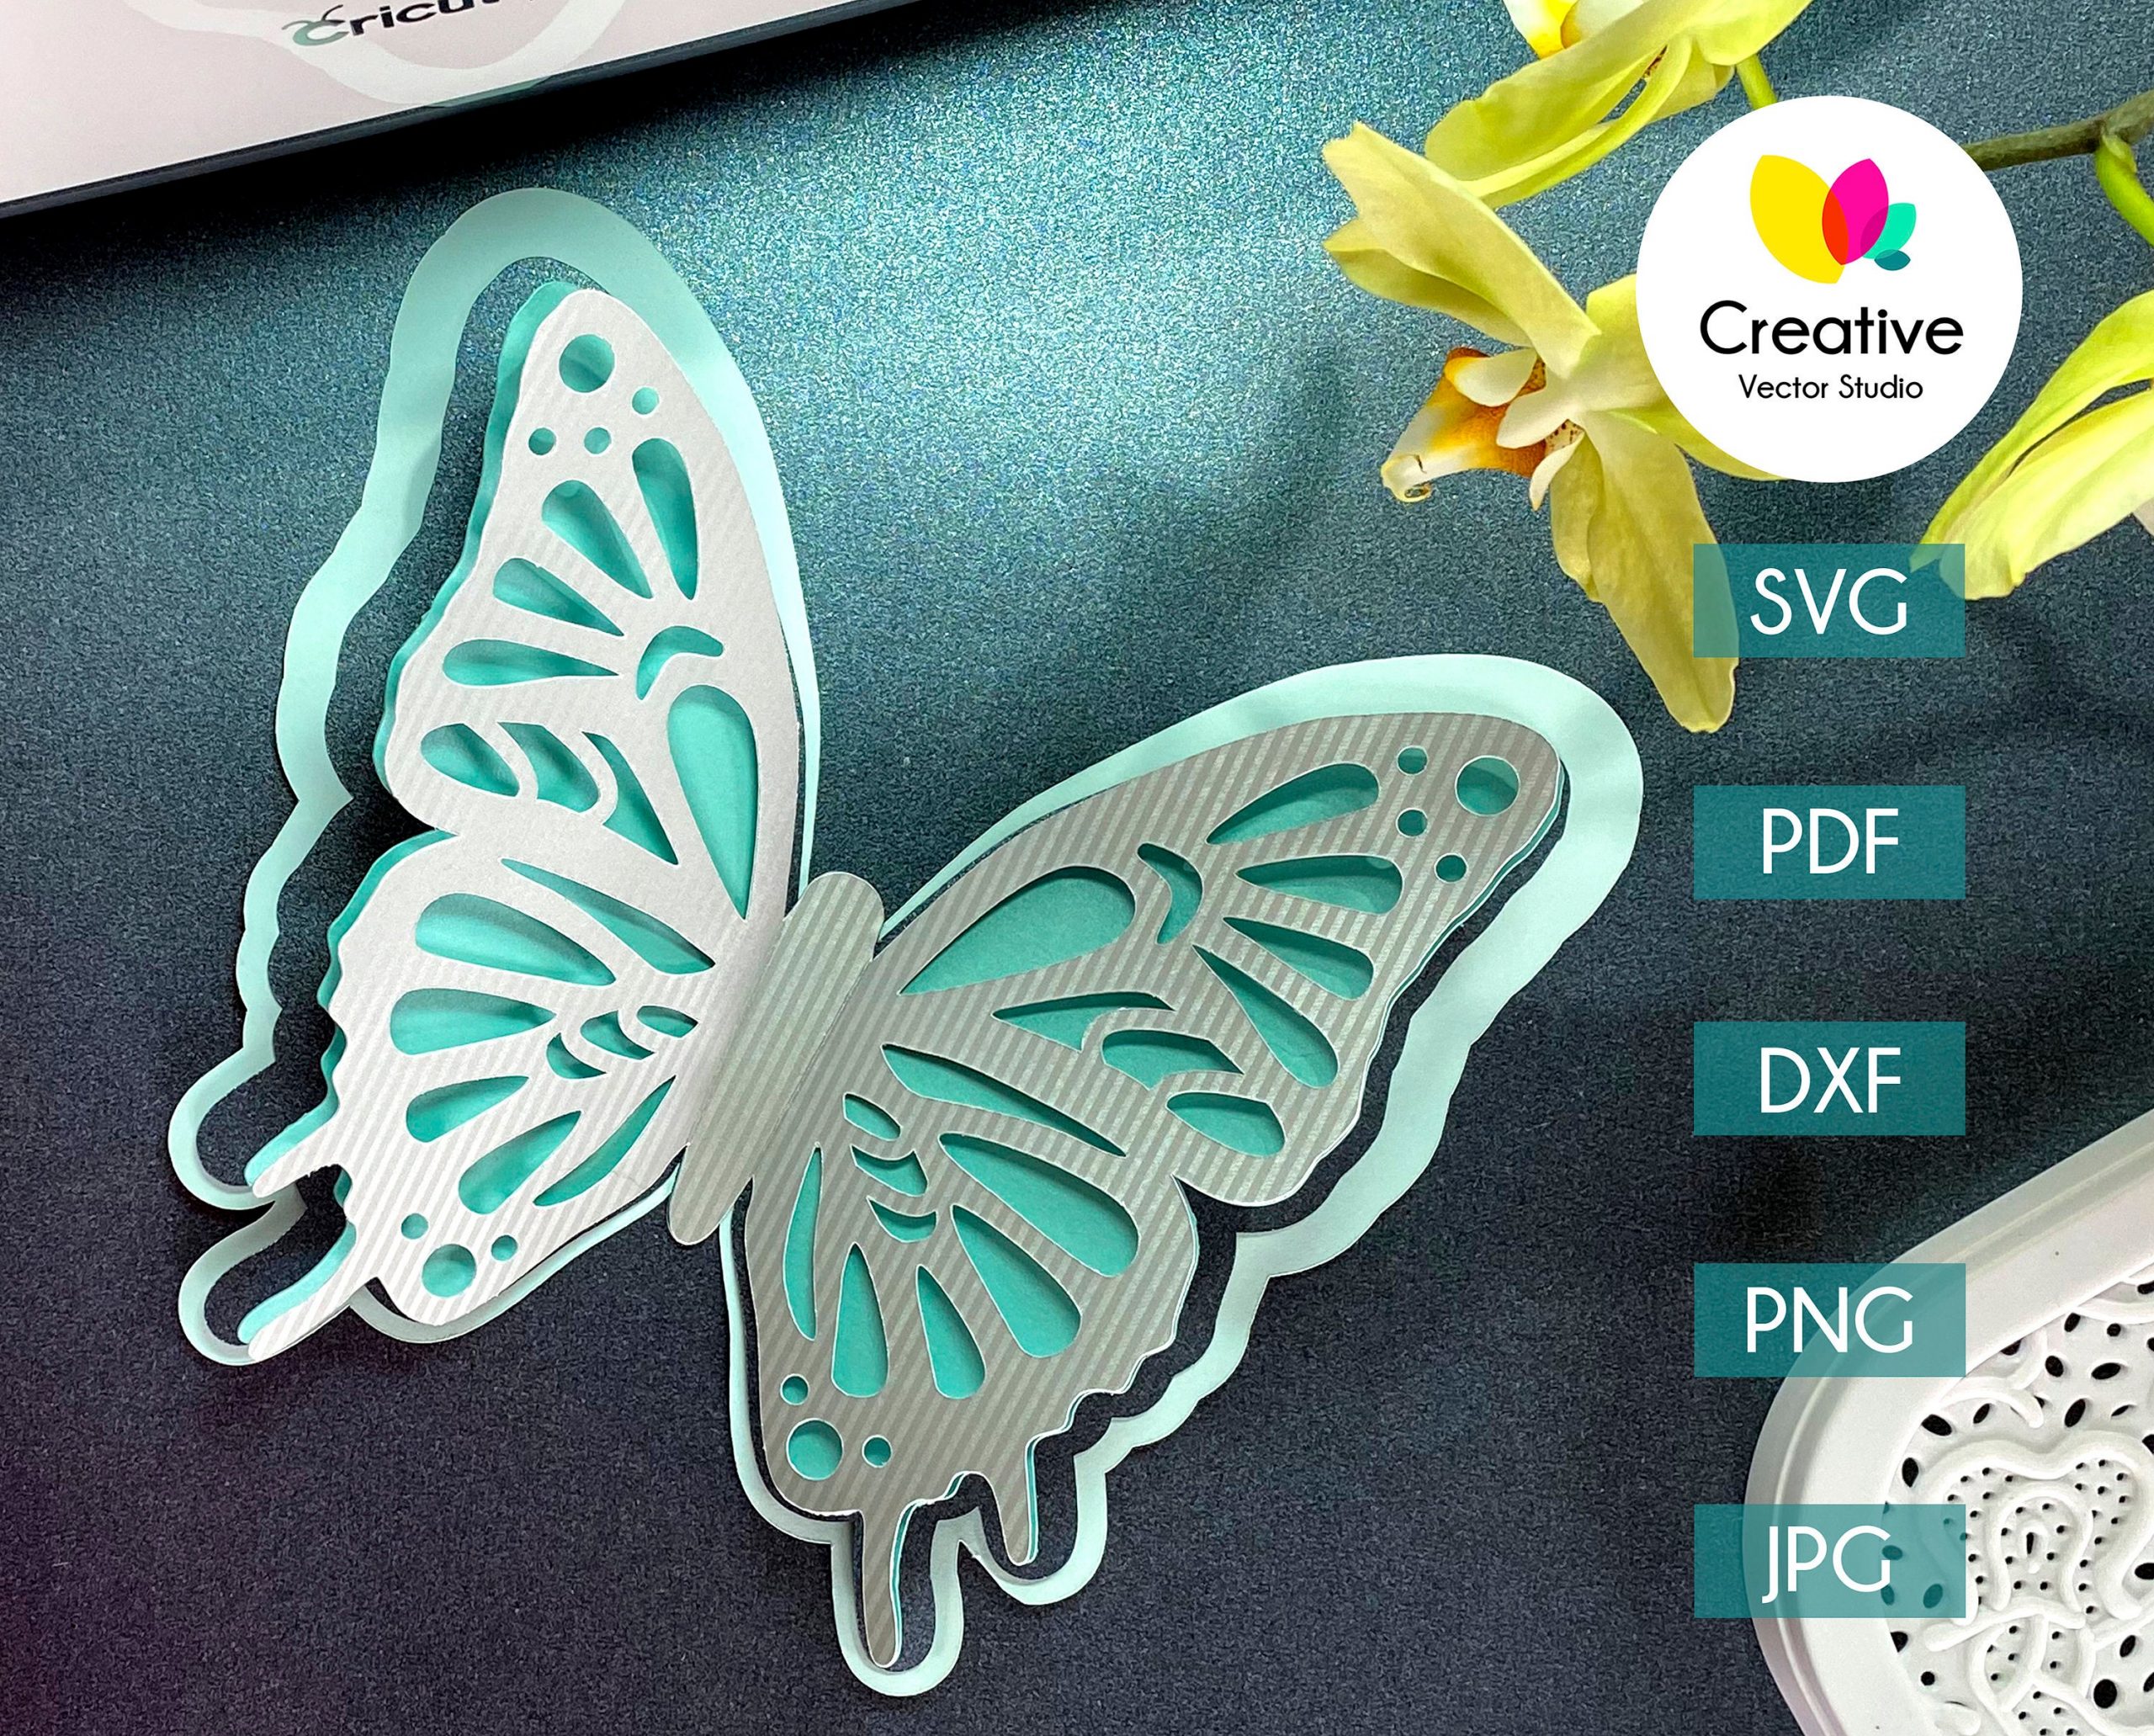 Download Butterfly Svg 3d Butterfly Svg Layered Butterfly Svg Cut Files For Cricut Silhouette Commercial Use Butterflies Svg Dxf Butterfly Clipart Clip Art Art Collectibles